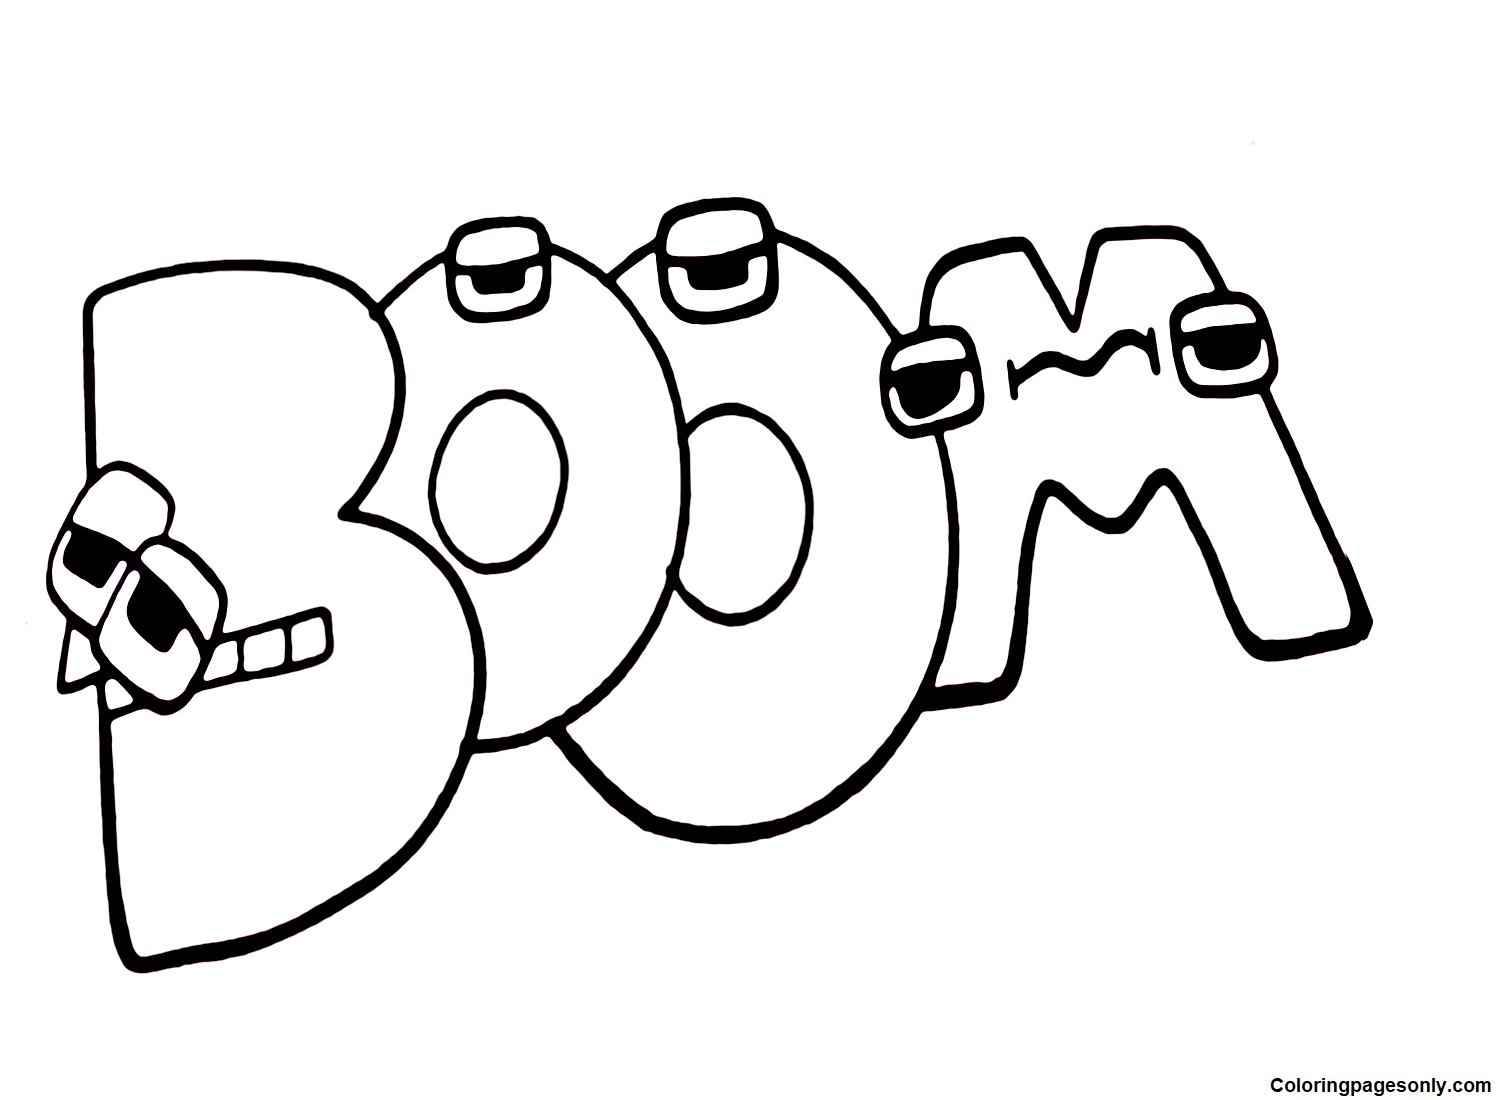 BOOM from Alphabet Lore Coloring Page